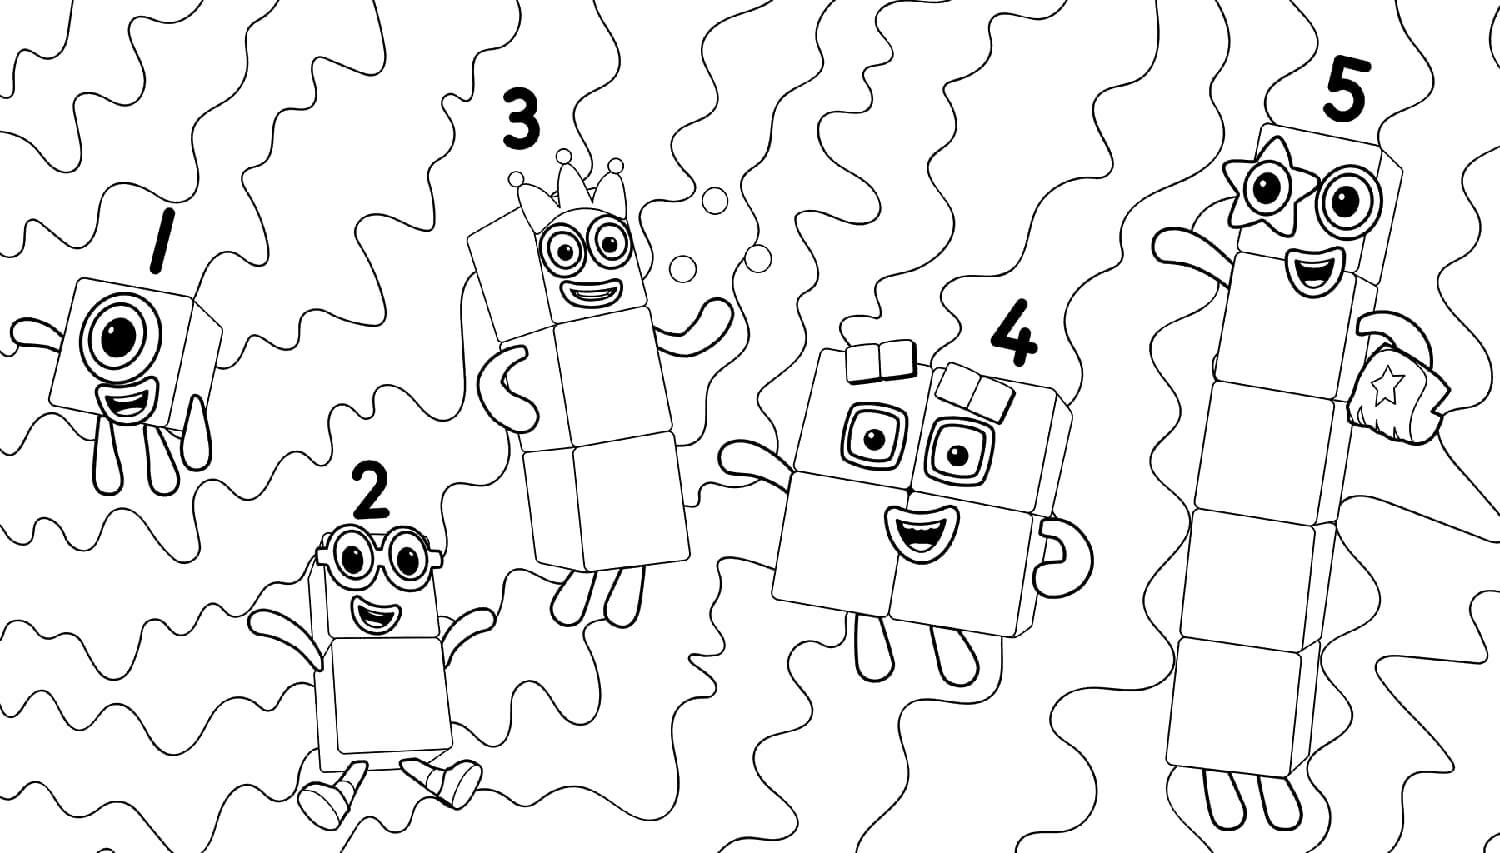 numberblocks-from-1-to-5-coloring-page-free-printable-coloring-pages-for-kids